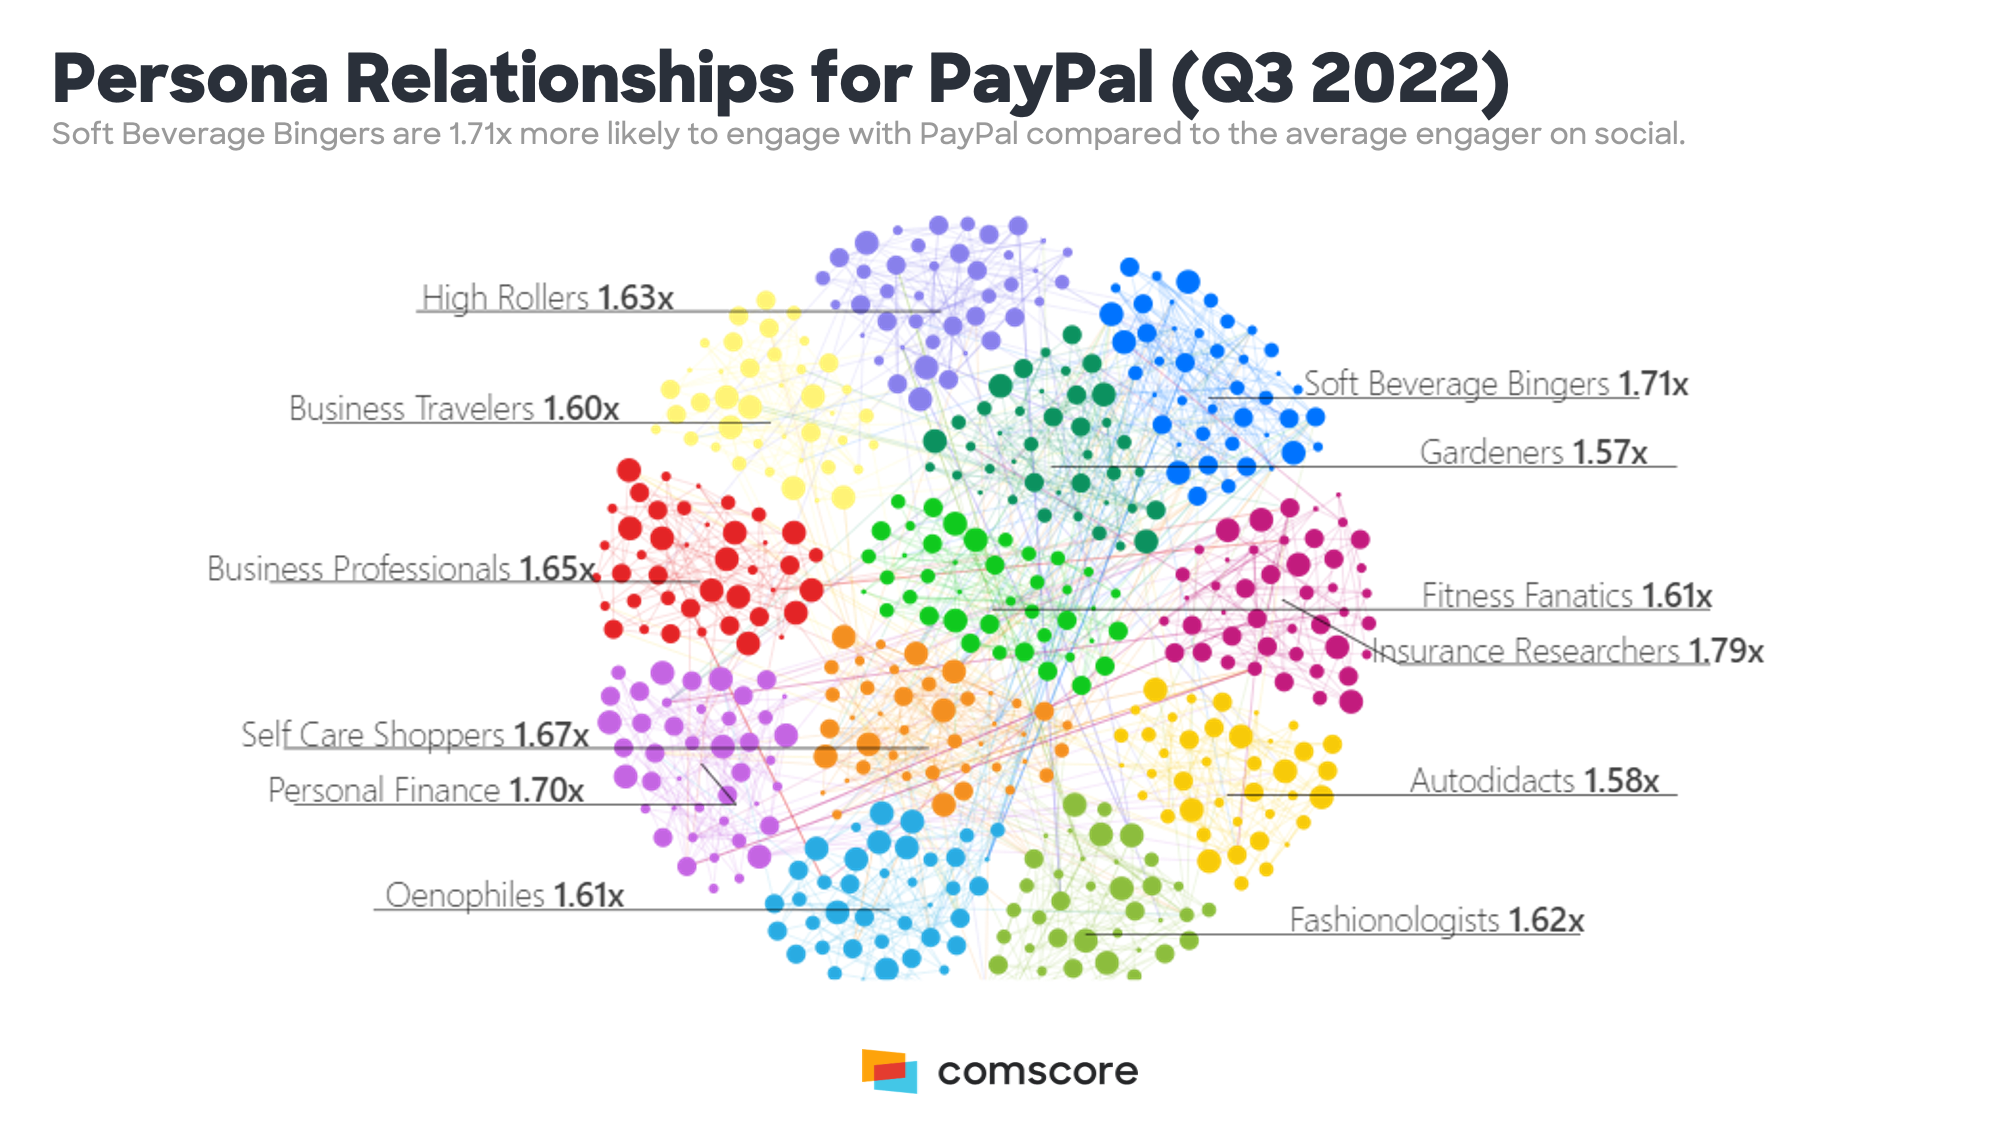 Persona Relationships for PayPal (Q3 2022)